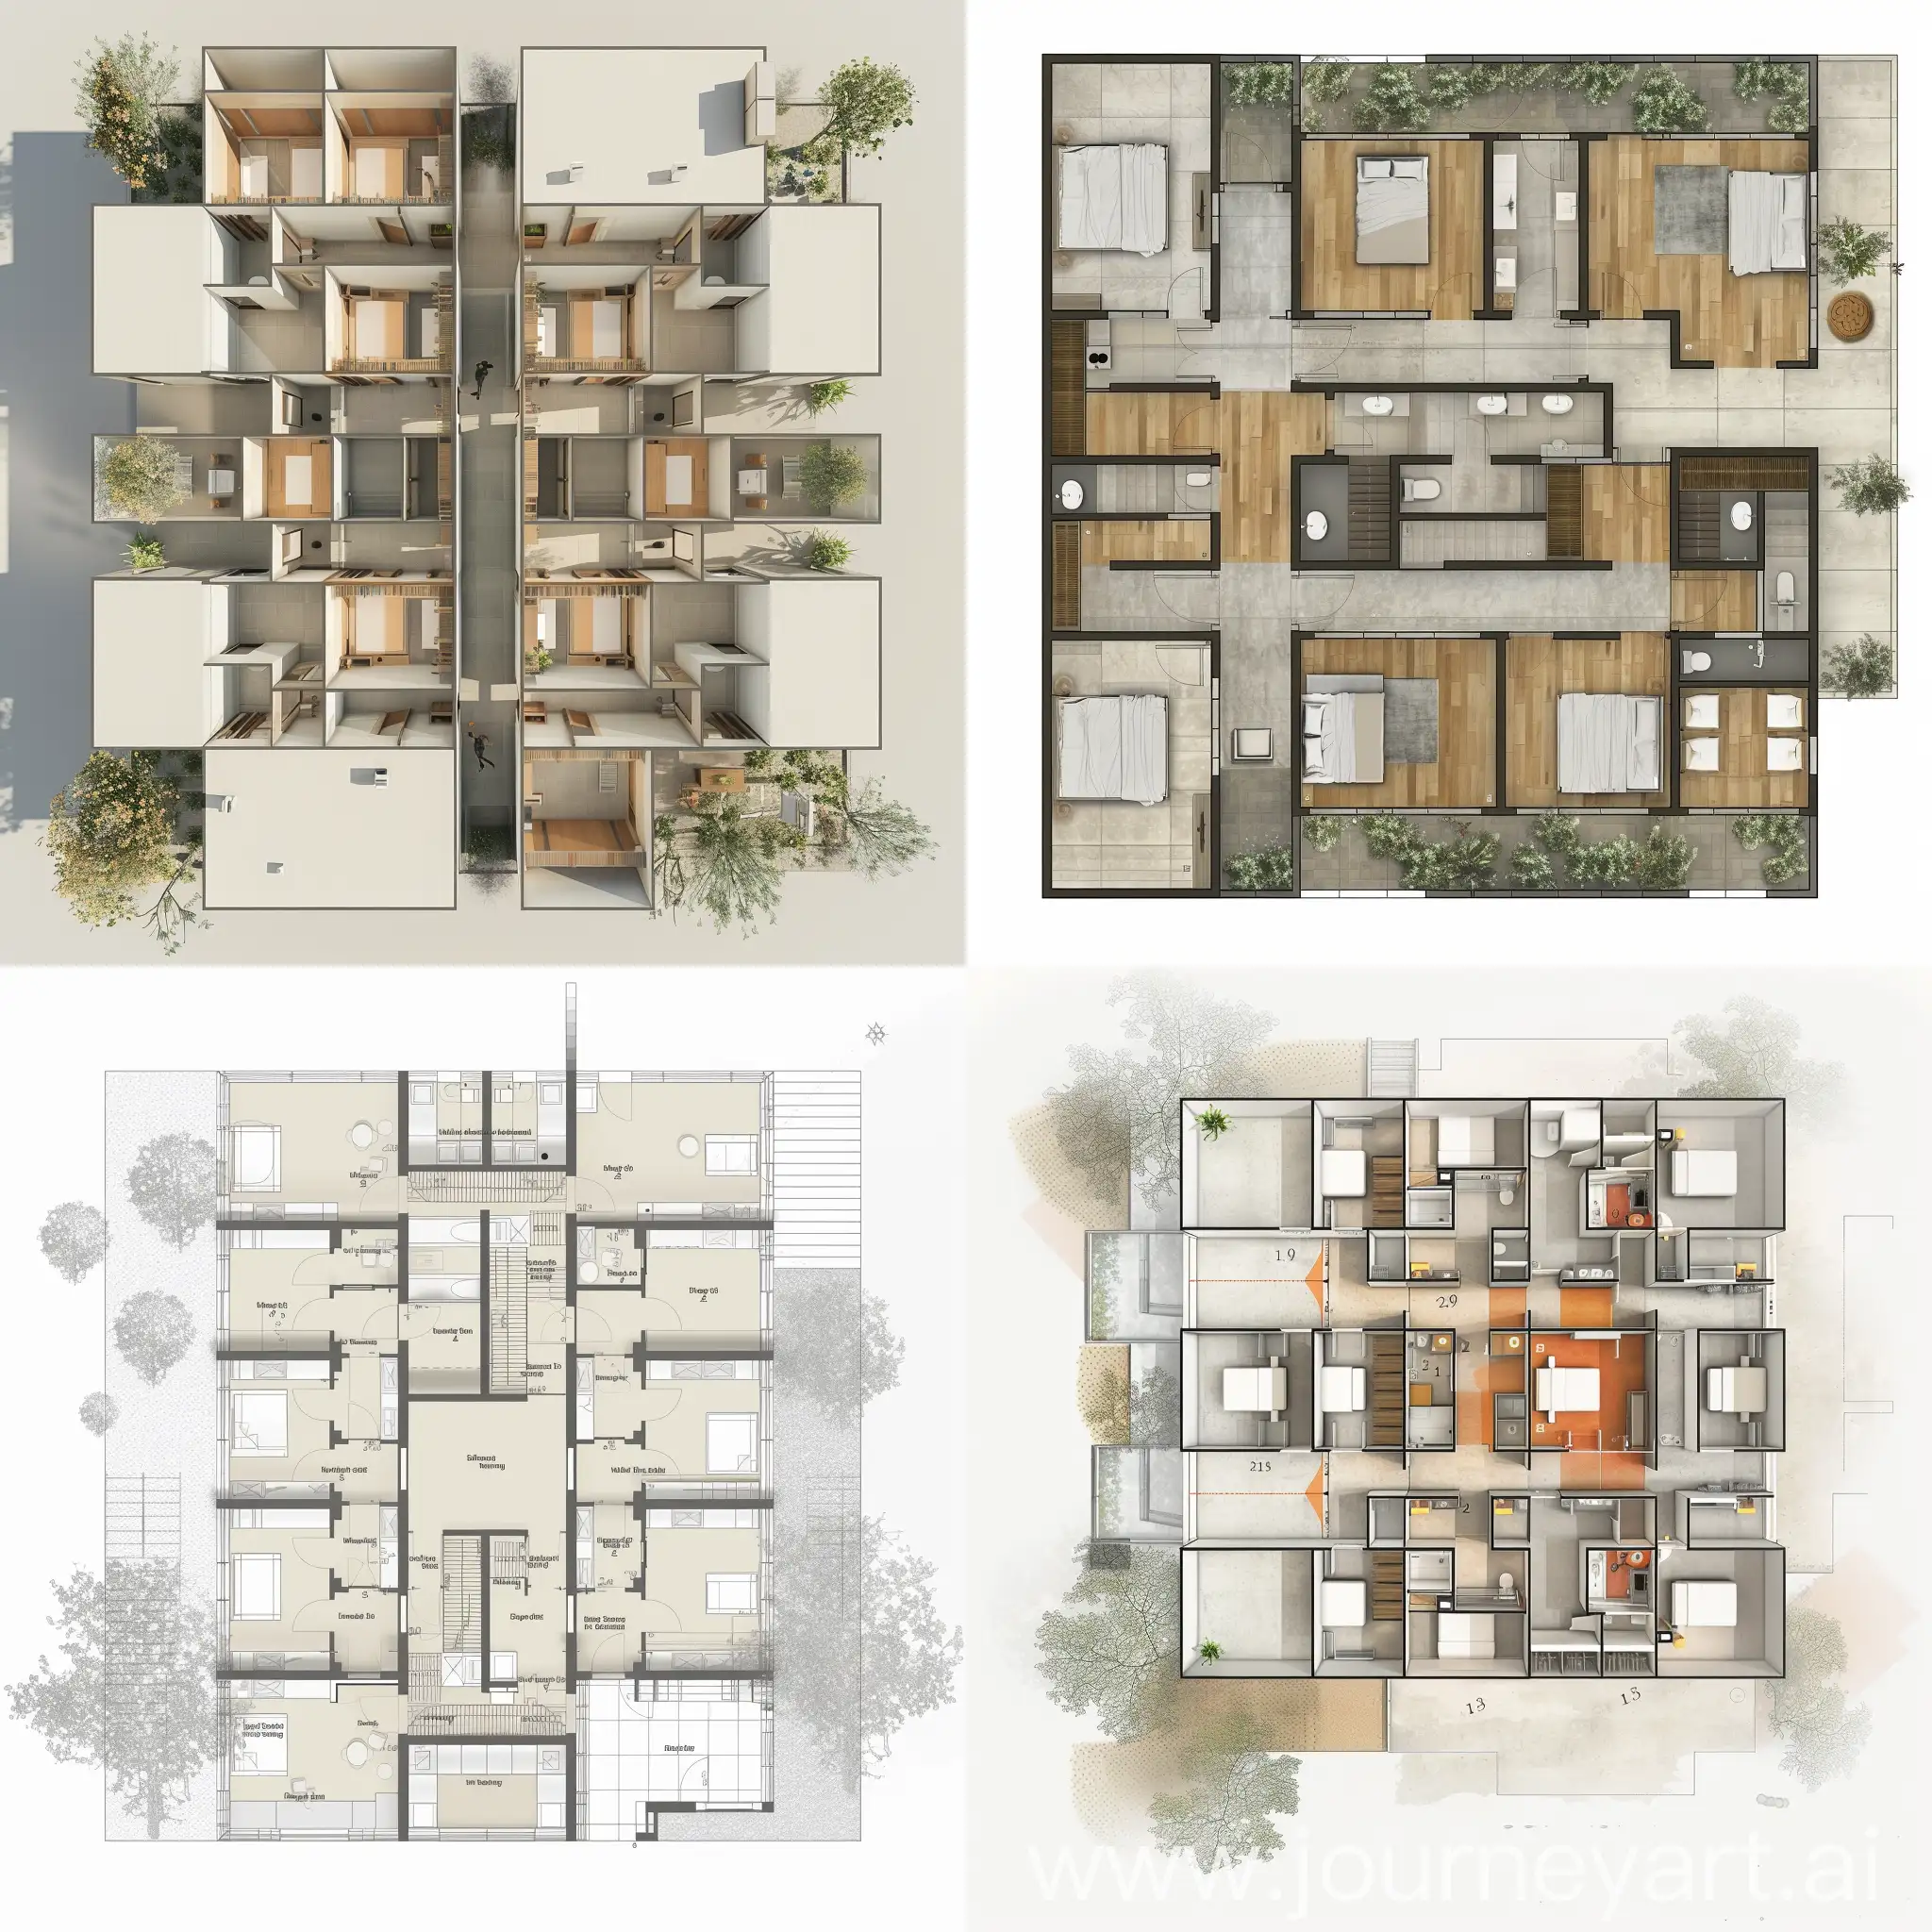 Modern-Dormitory-Floor-Plan-with-Integrated-Communal-Spaces-and-Sunlit-Voids